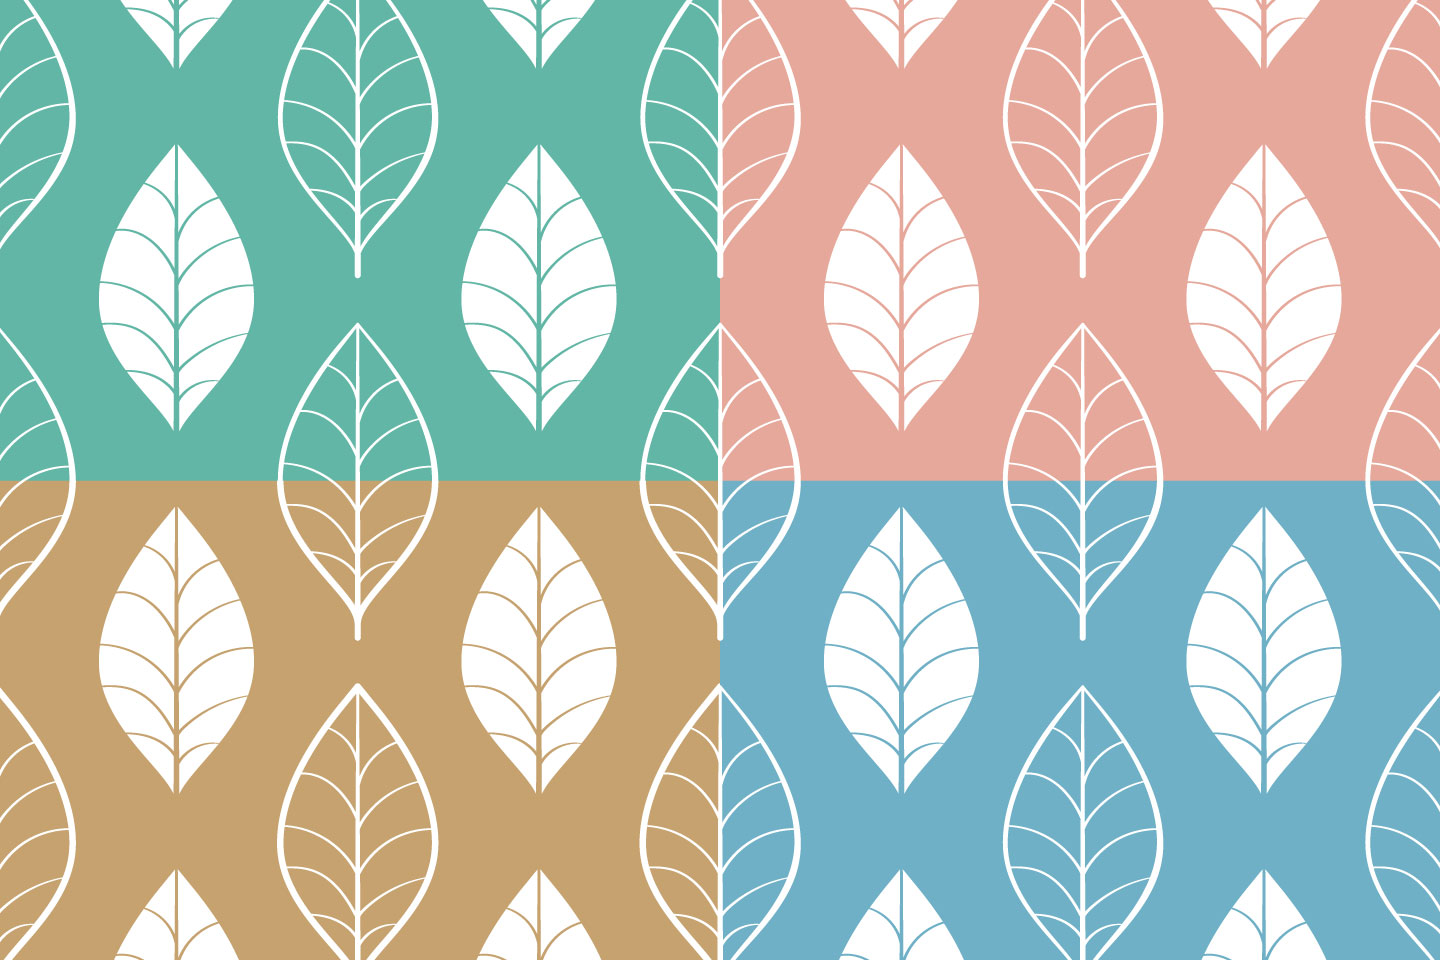 Leaves Vector Free Seamless Pattern - GraphicSurf.com